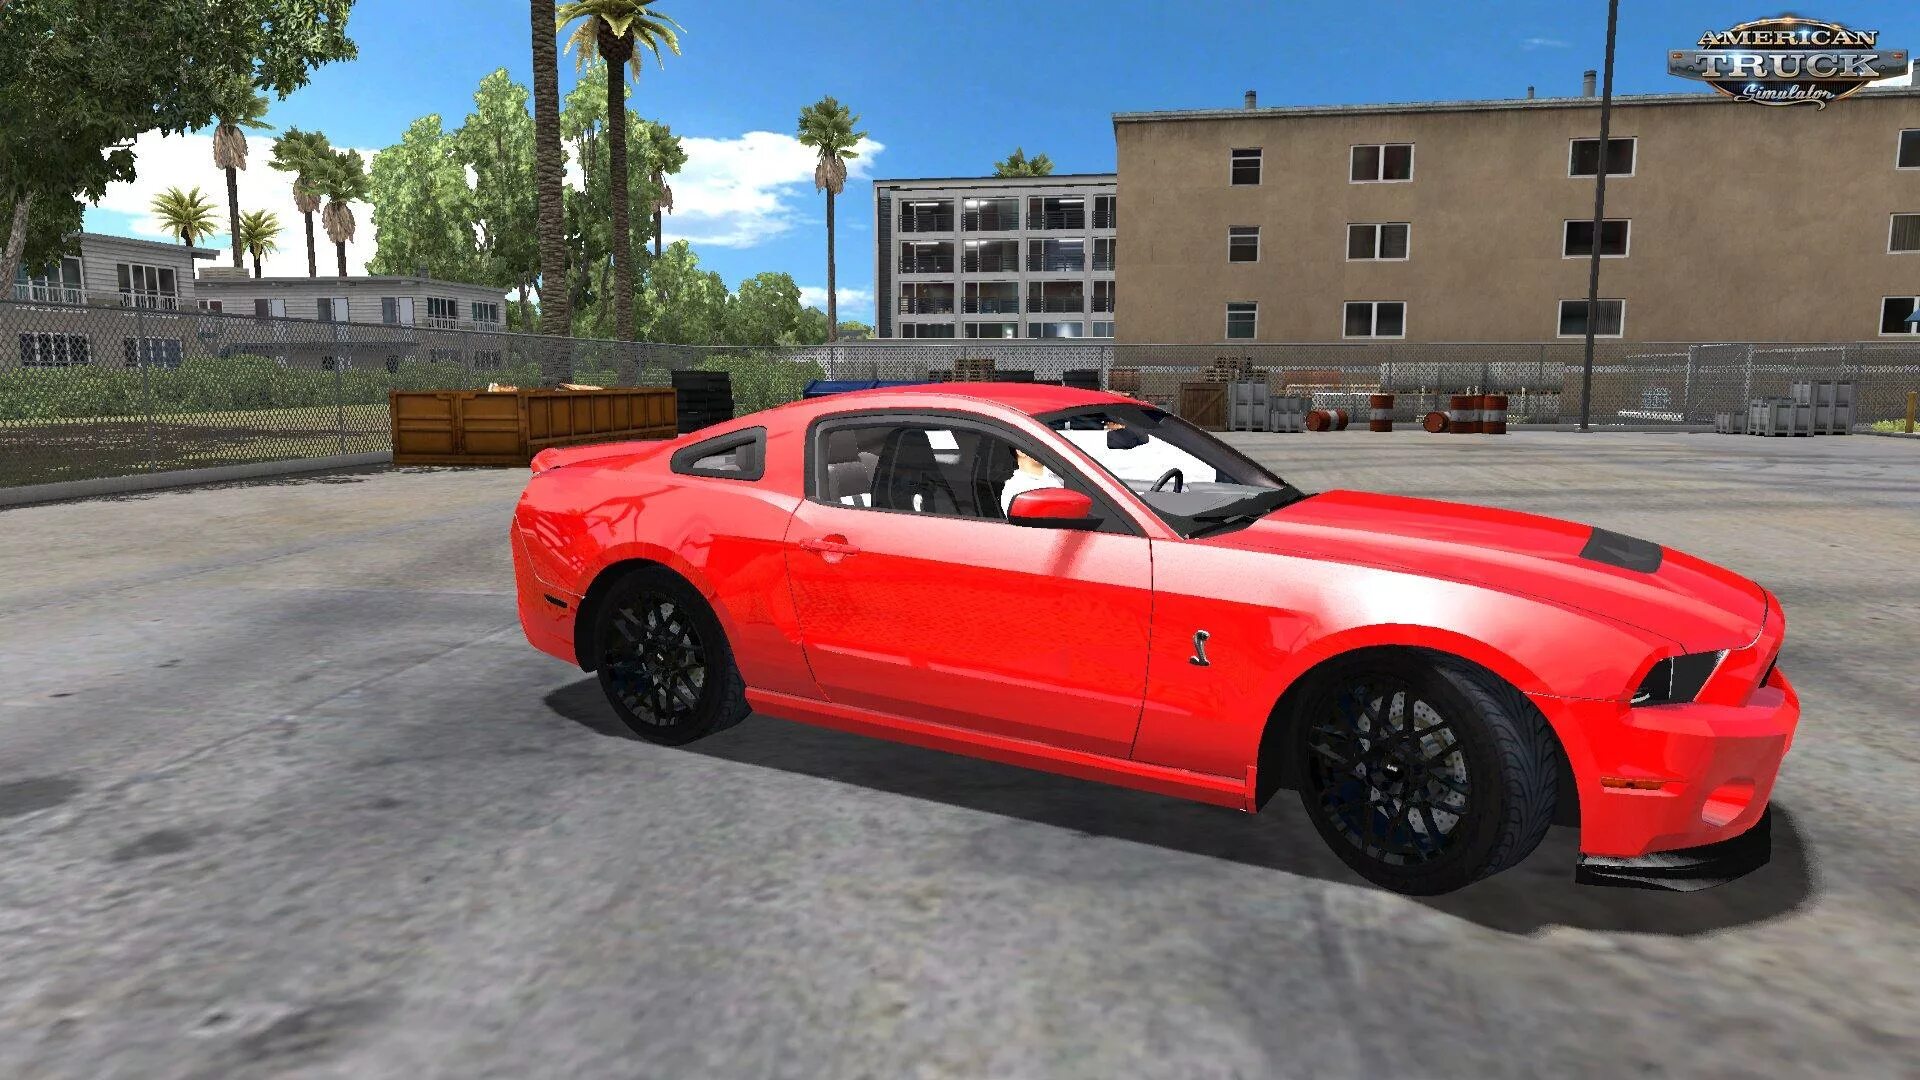 Ford Mustang gt500 Shelby BEAMNG Drive. American Truck Simulator Ford Mustang. Shelby gt 500 самп. Мод на ATS Форд. Моды на авто 1.20 1